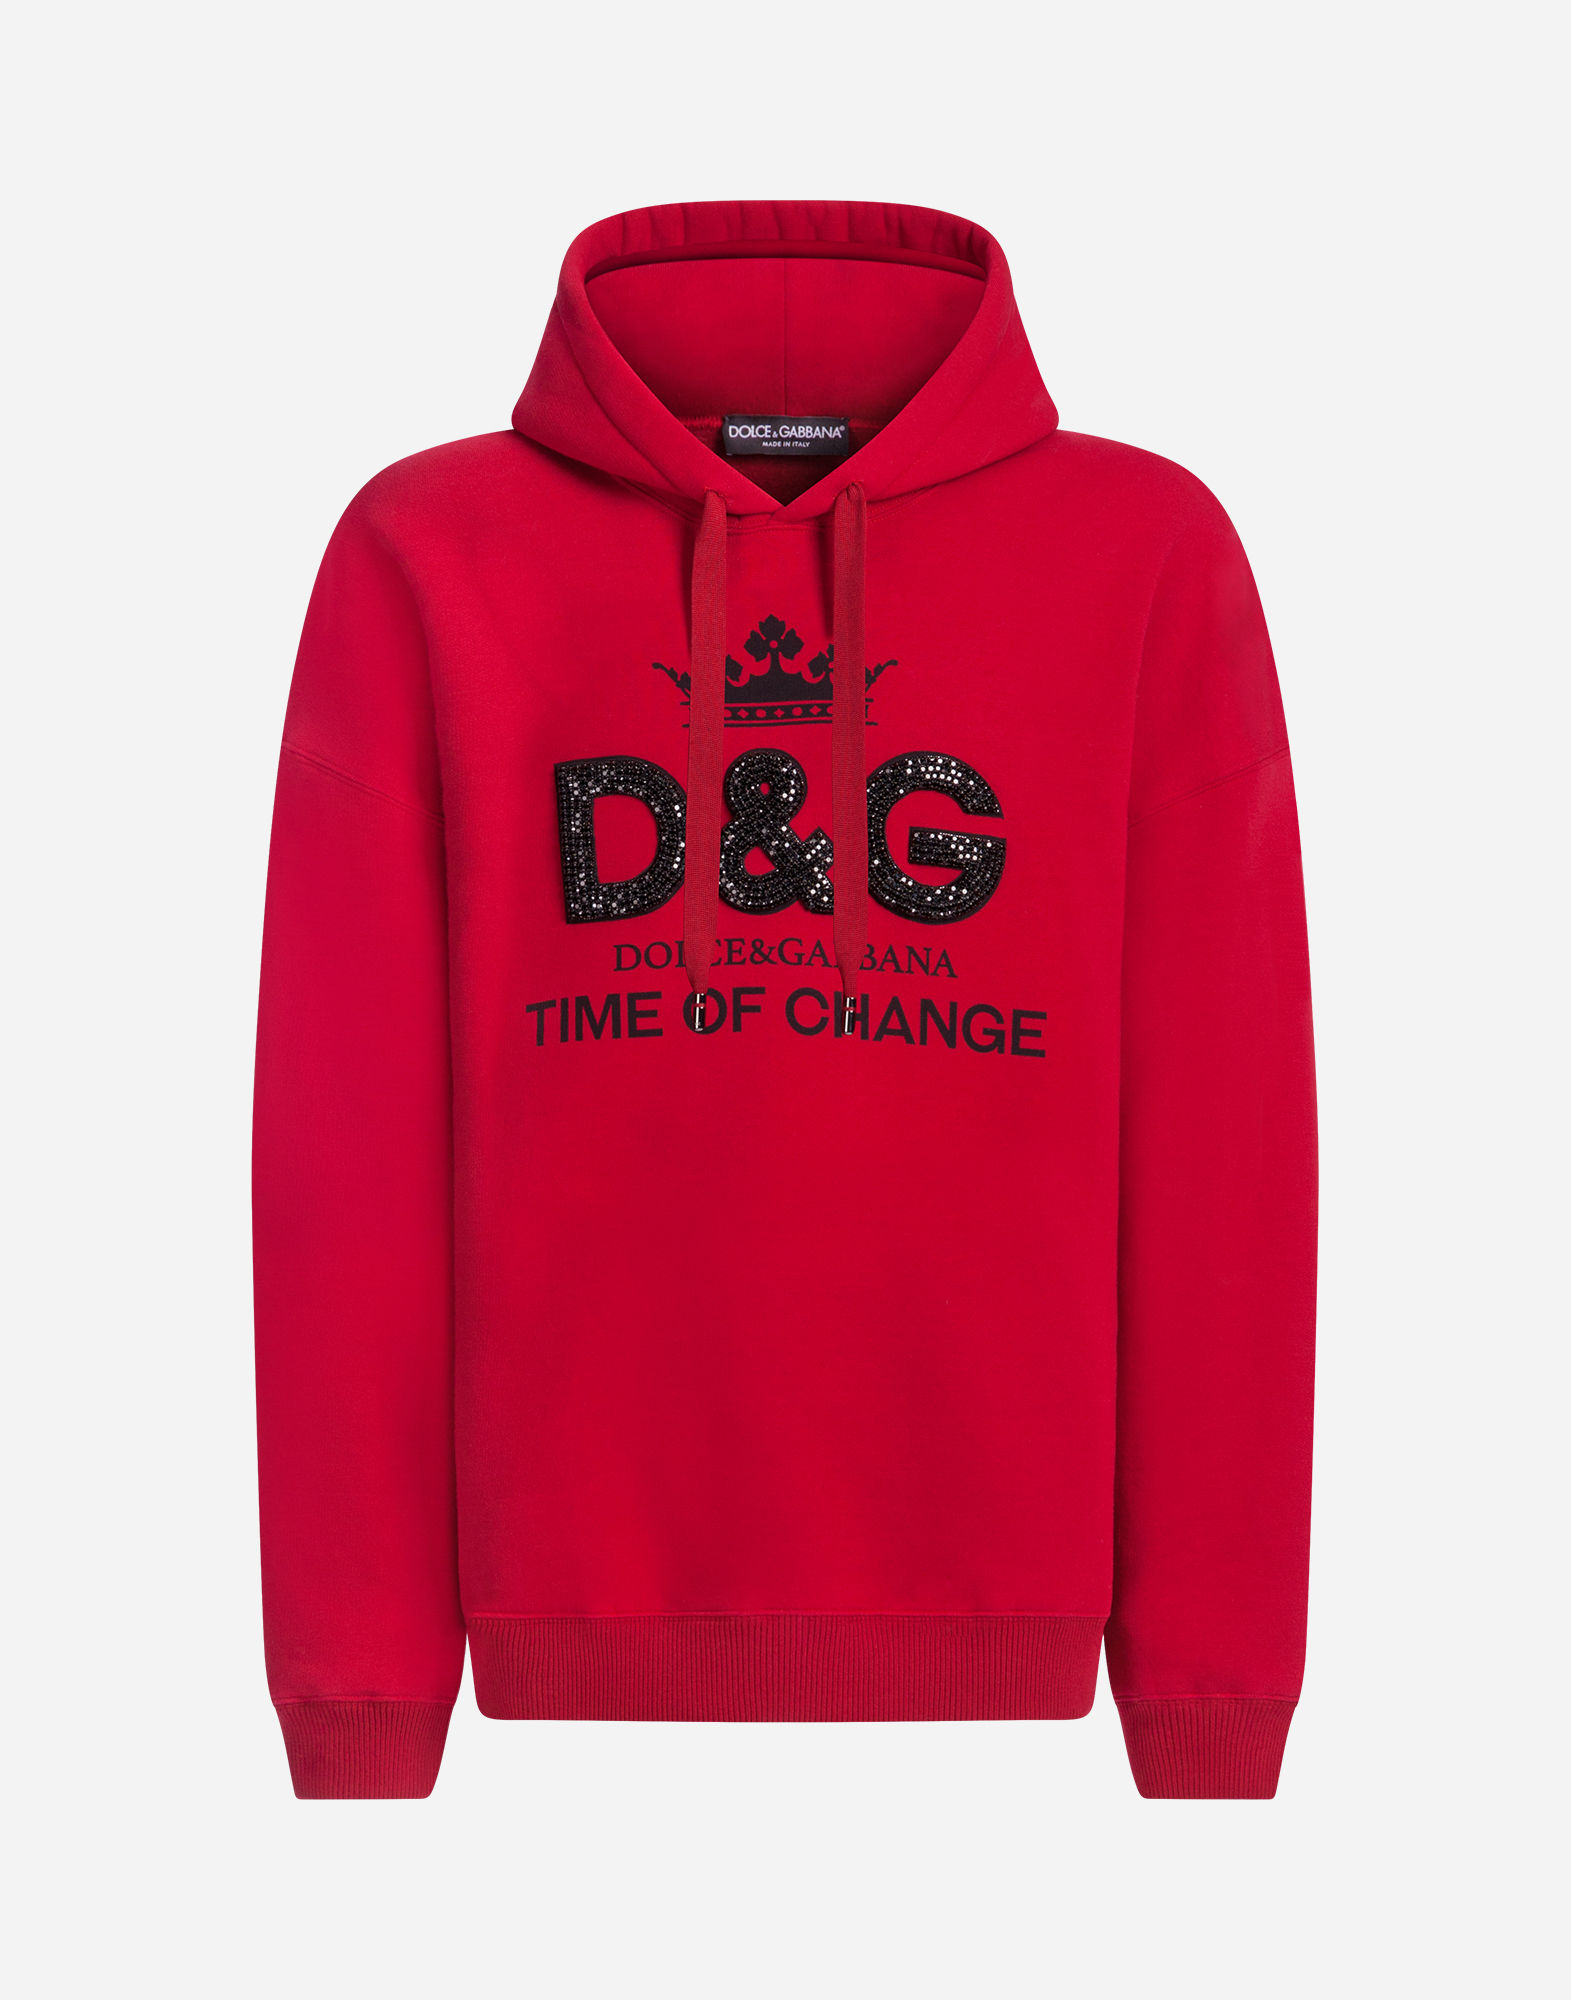 dolce and gabbana red hoodie